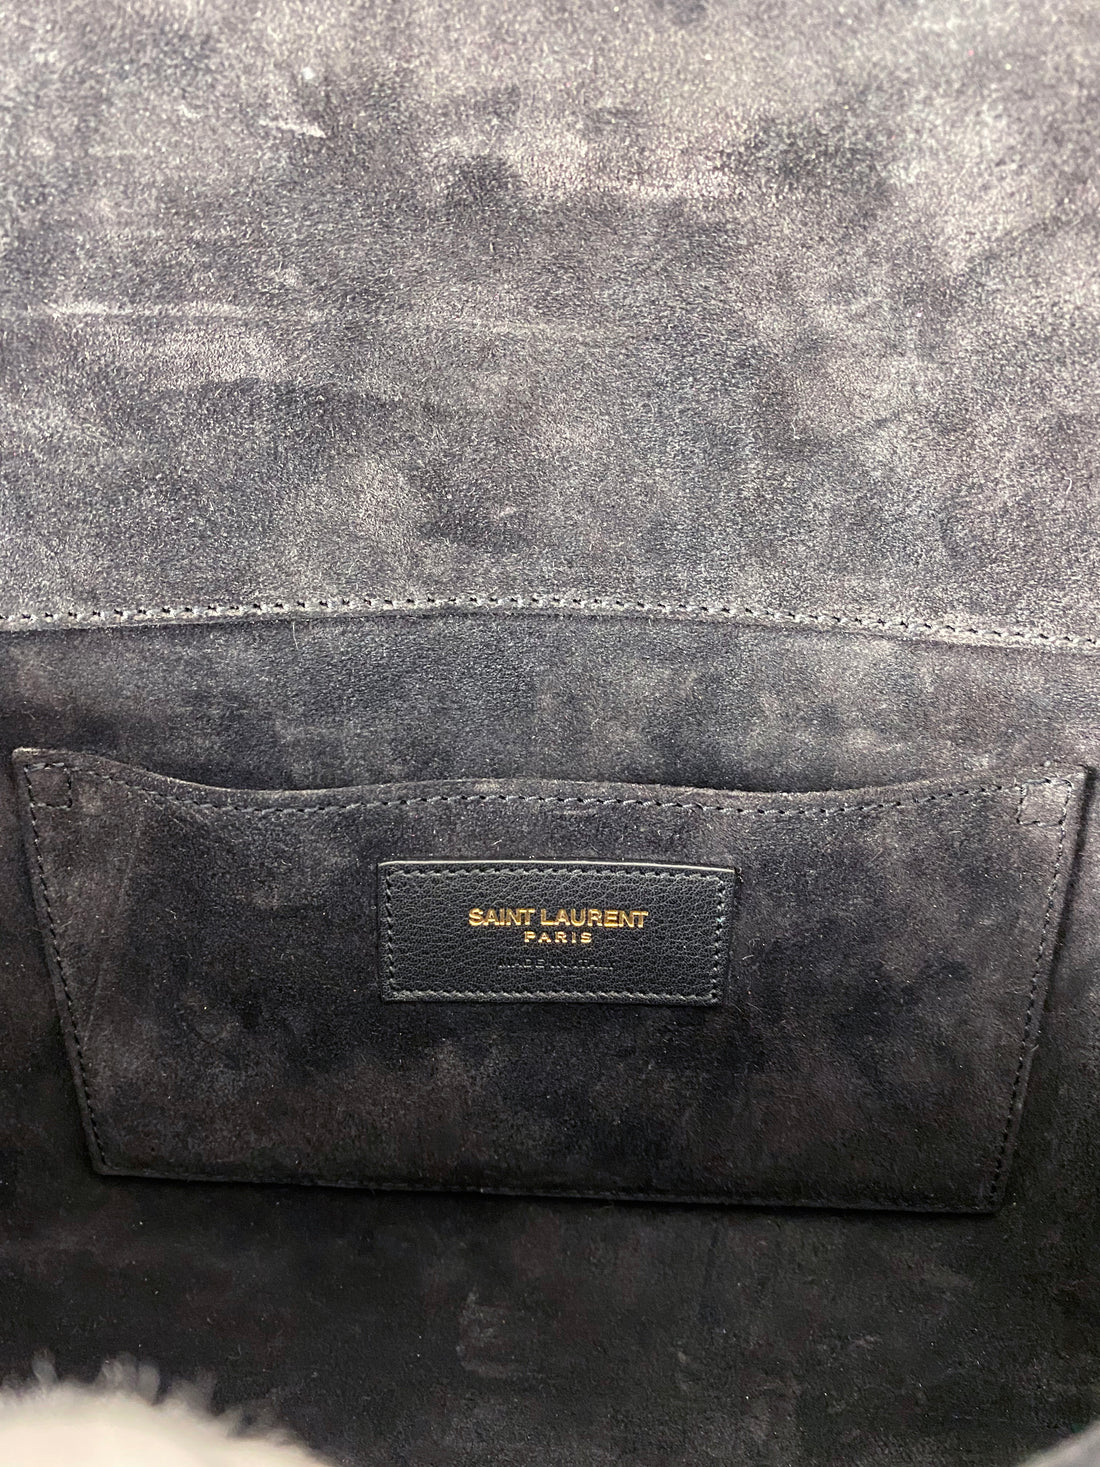 Leather clutch bag Yves Saint Laurent Black in Leather - 25286284